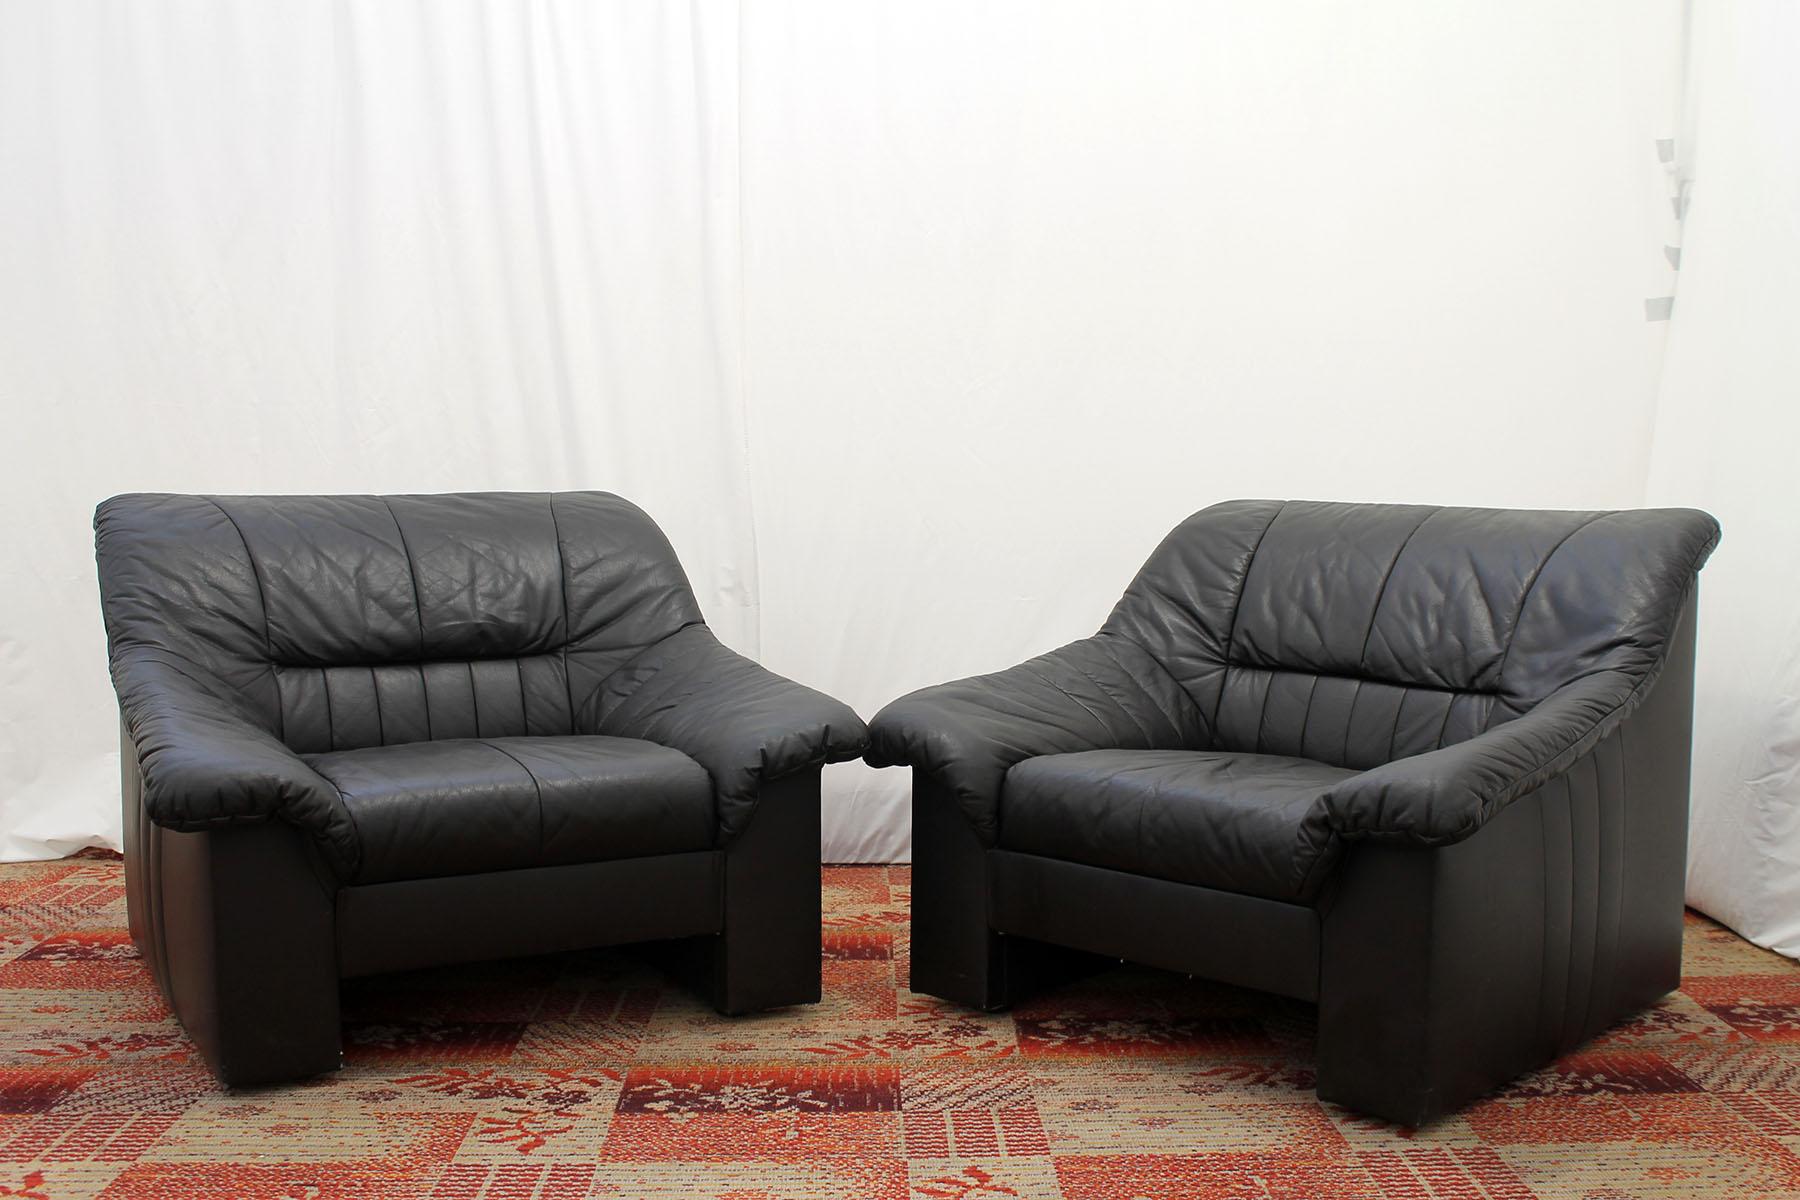 These comfortable leather armchairs were made in the 1980s in the former Czechoslovakia.
The chairs are made of black leather.
They are in good vintage condition with no damage.
Price is for the pair.

 Dimensions of the armchairs: 98x75x93 cm